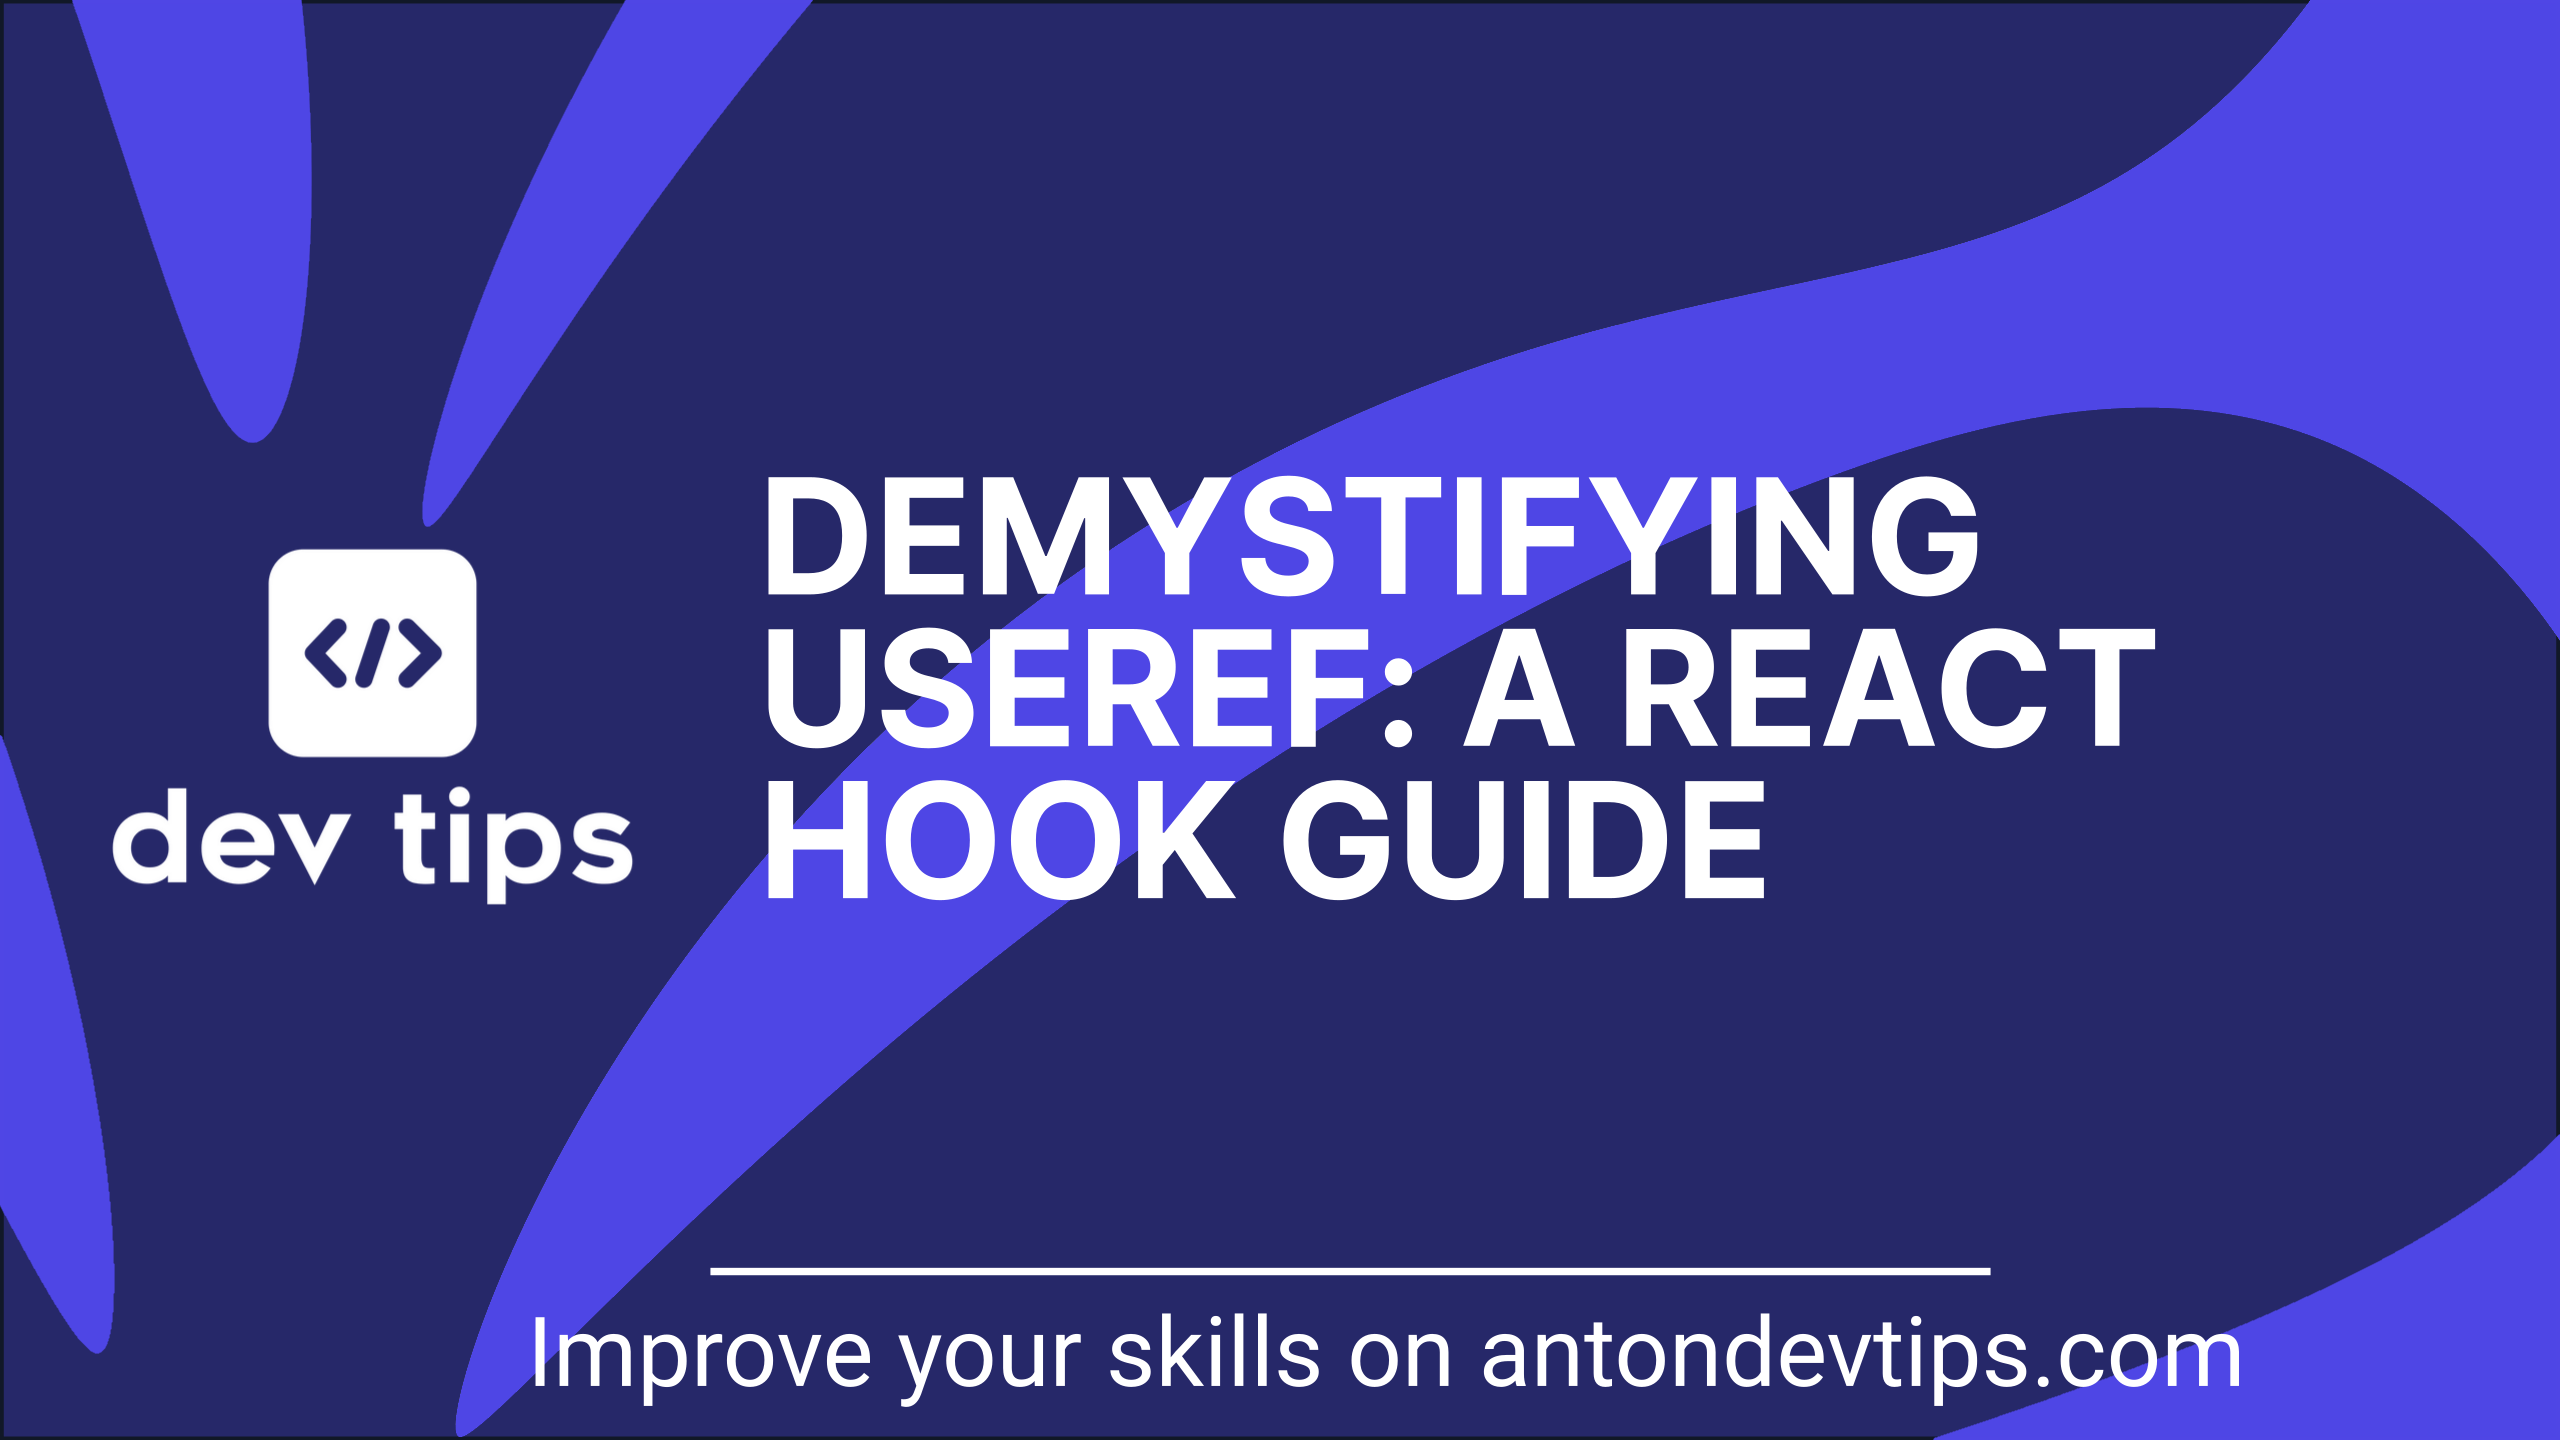 Demystifying useRef: A React Hook Guide